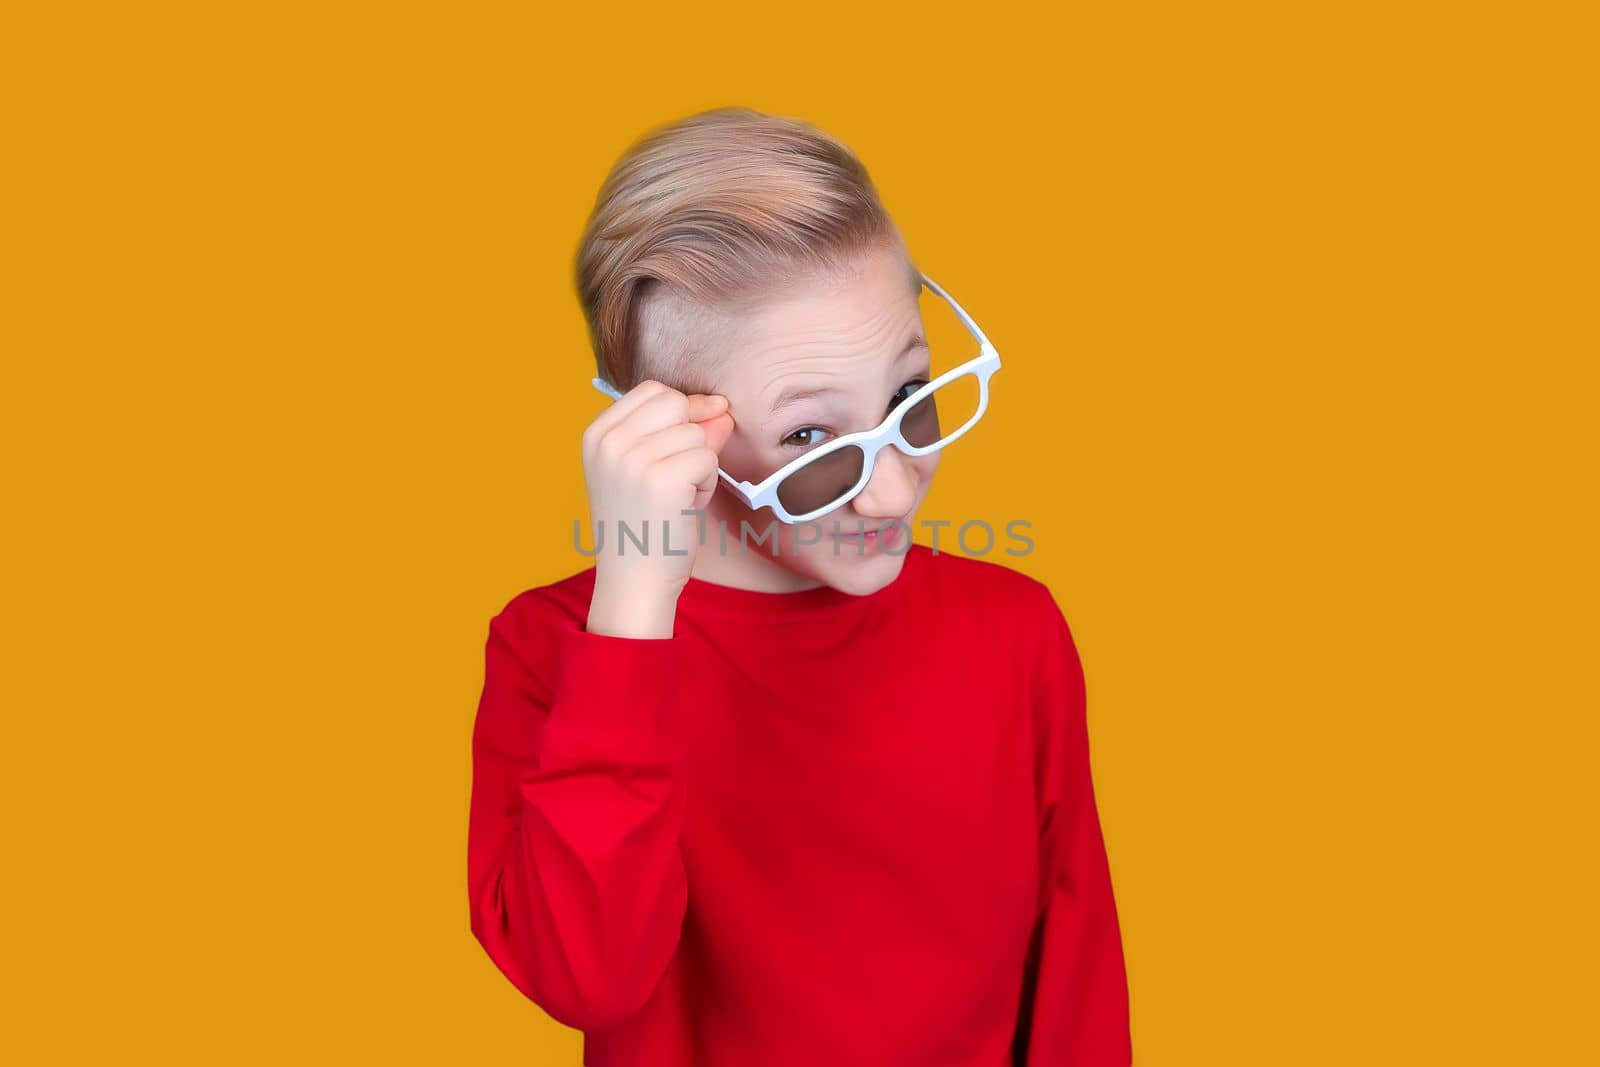 cool kid in red clothes and glasses showing emotions of surprise on a yellow background